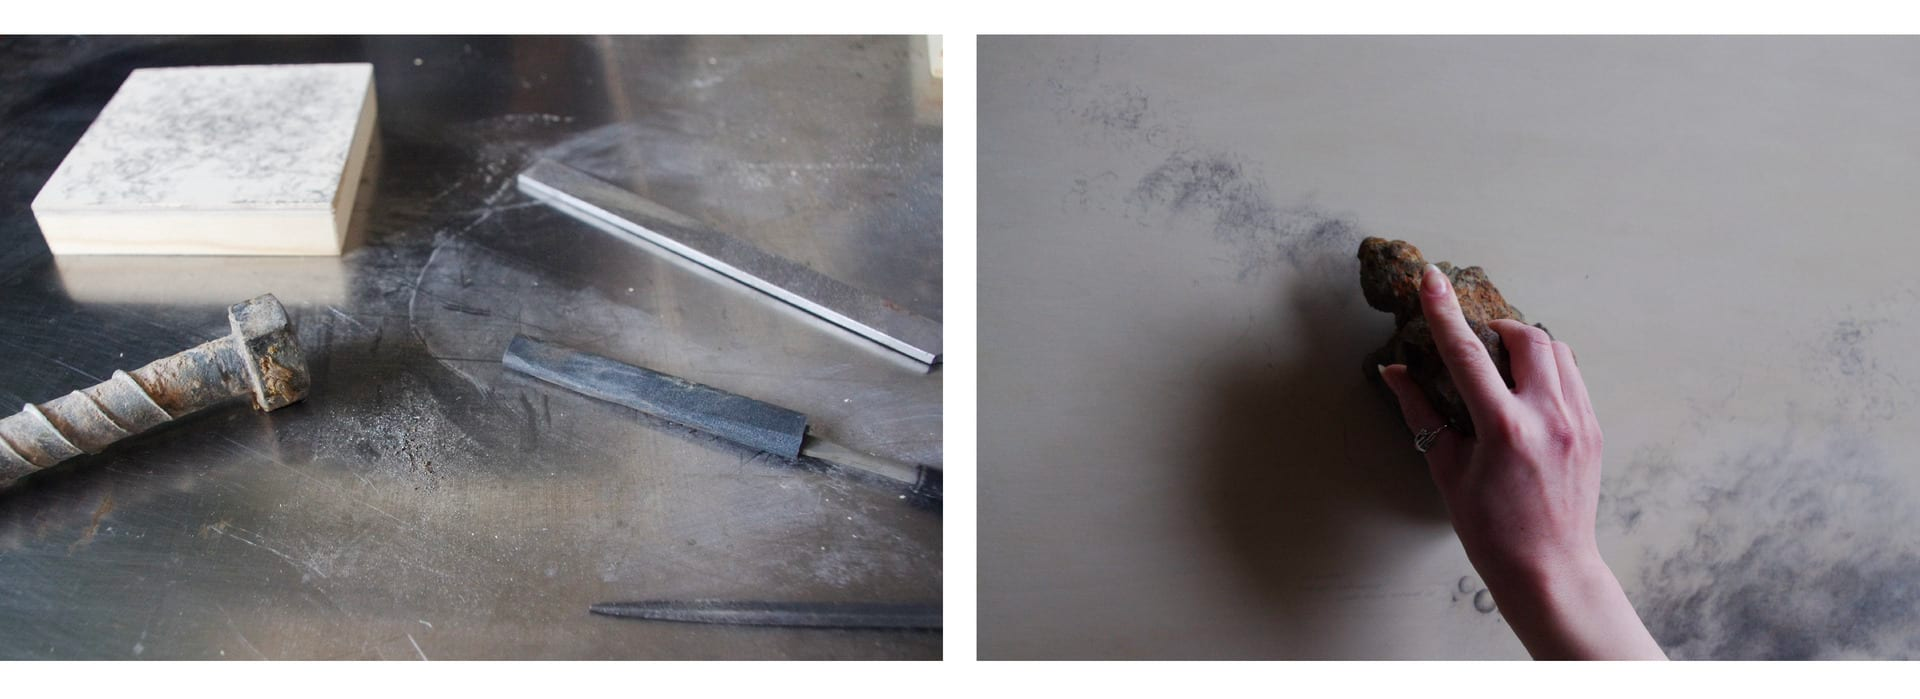 An image of tools lying on a shiny, dusty surface on the left, and on the right an image of a hand dabbing what looks like a rag, onto a surface making dark cloud-like marks.